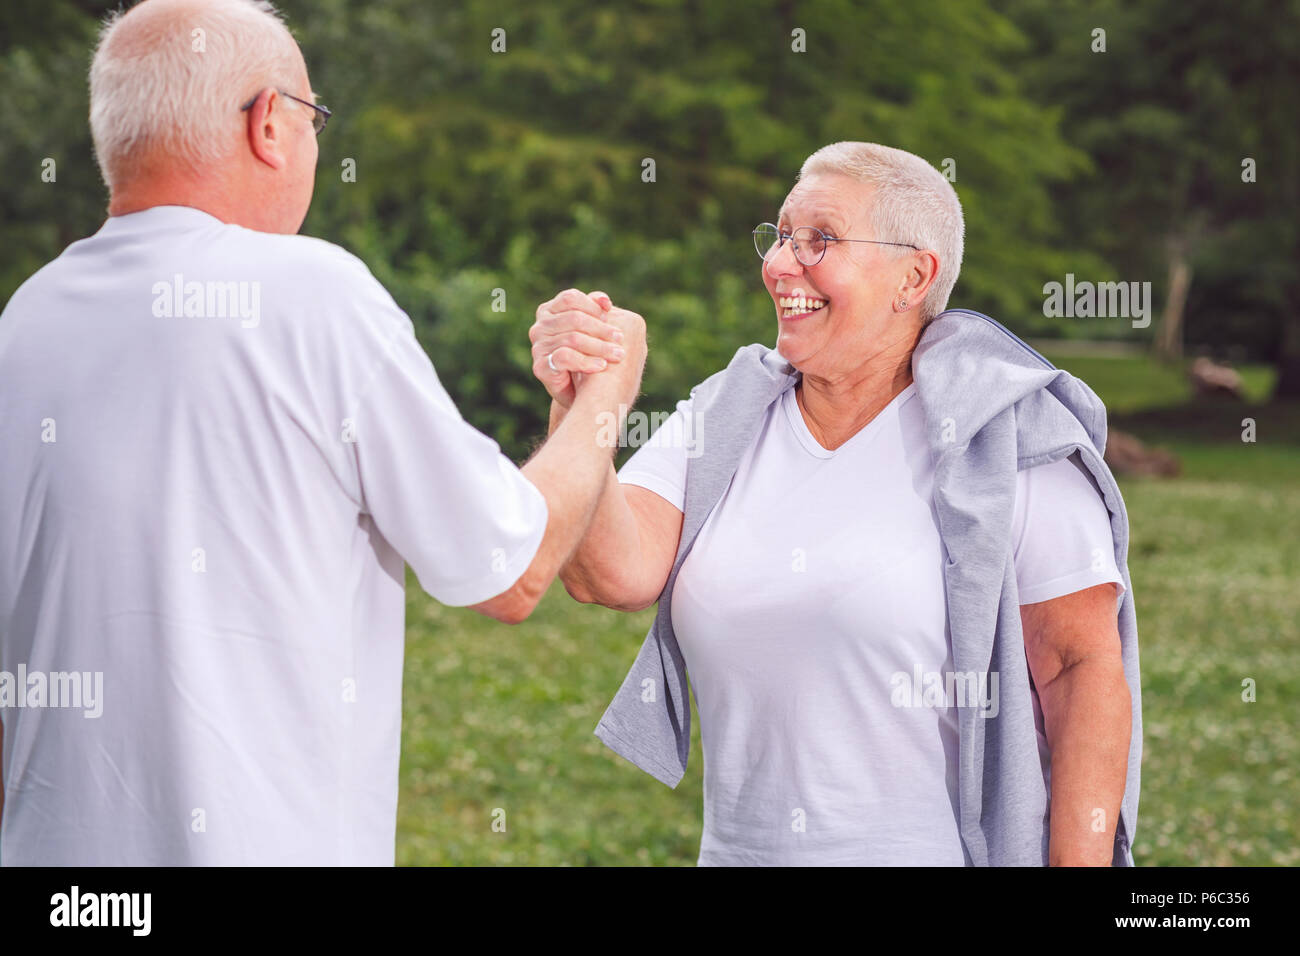 together we workout better- Smiling senior couple exercise and having fun together Stock Photo